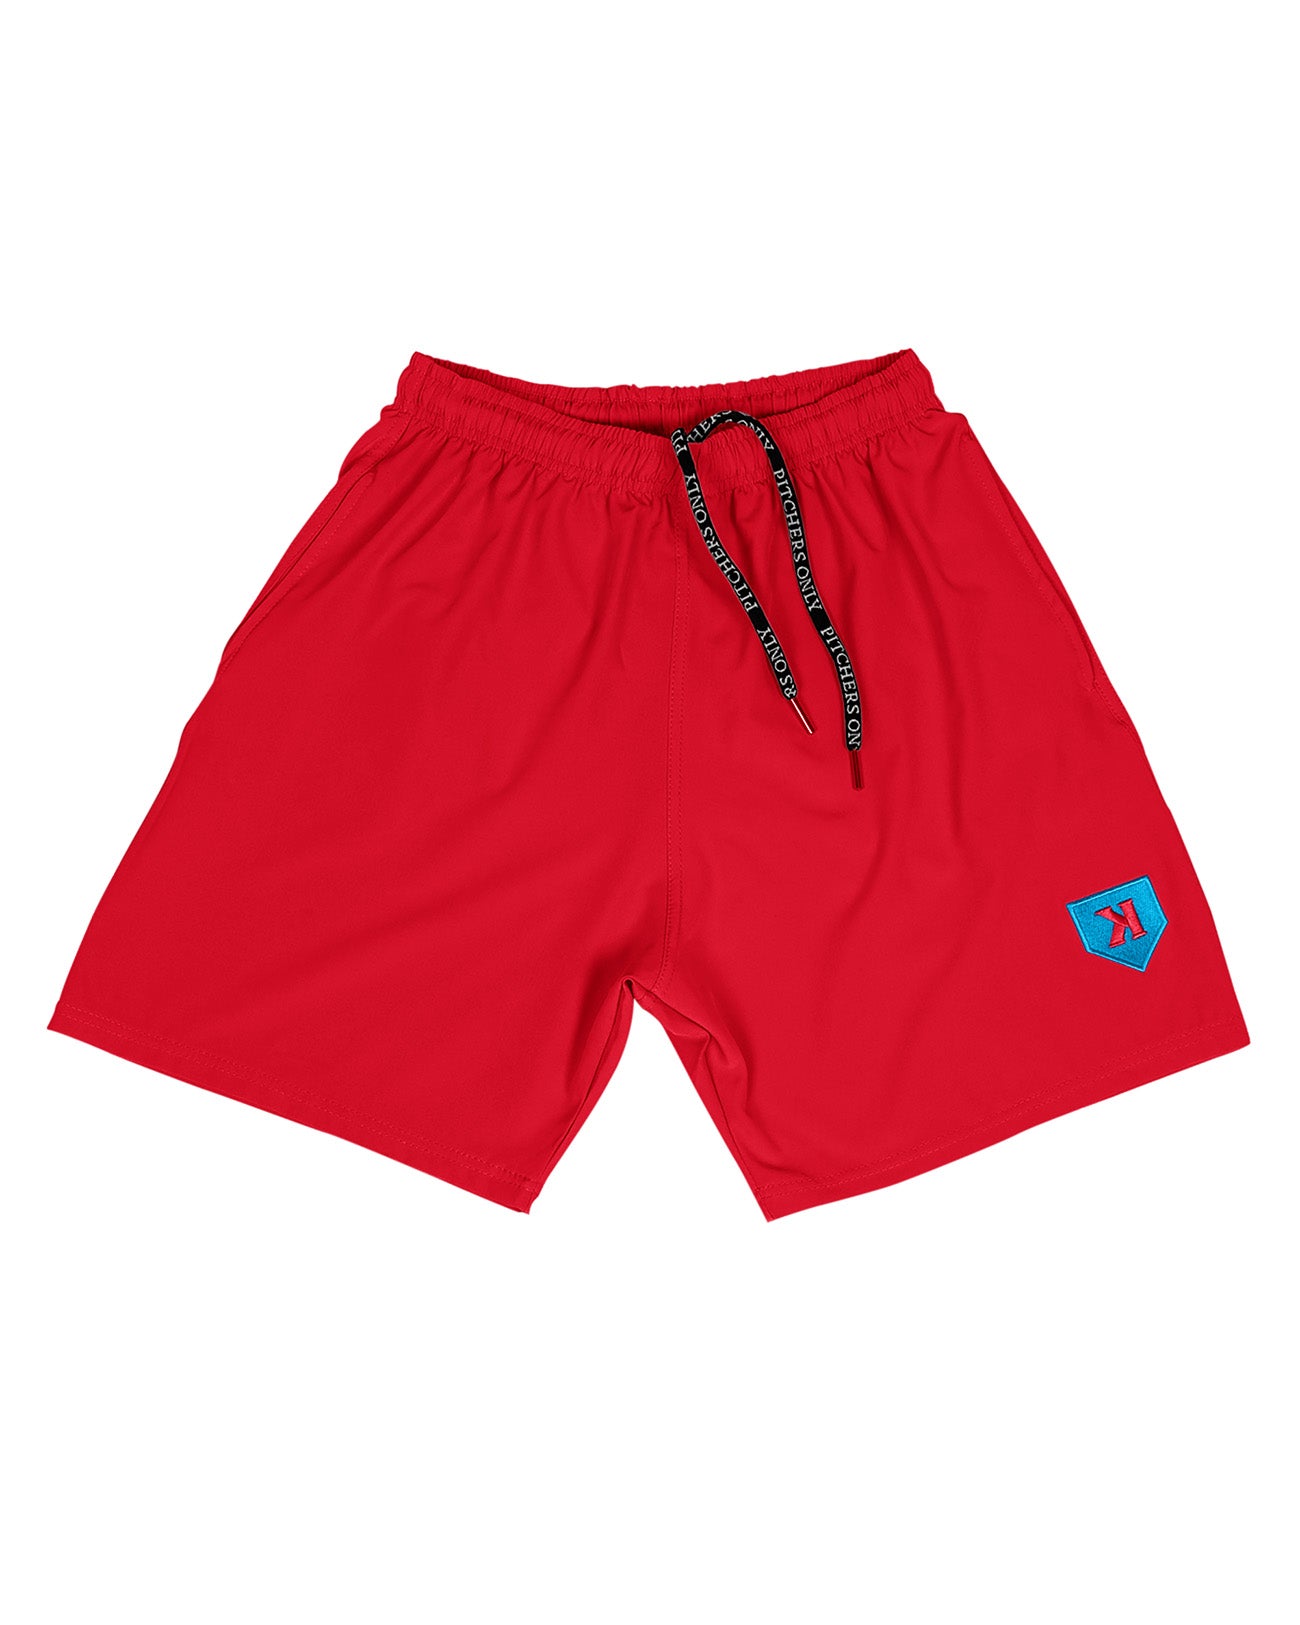 Bold Red Youth Training Shorts